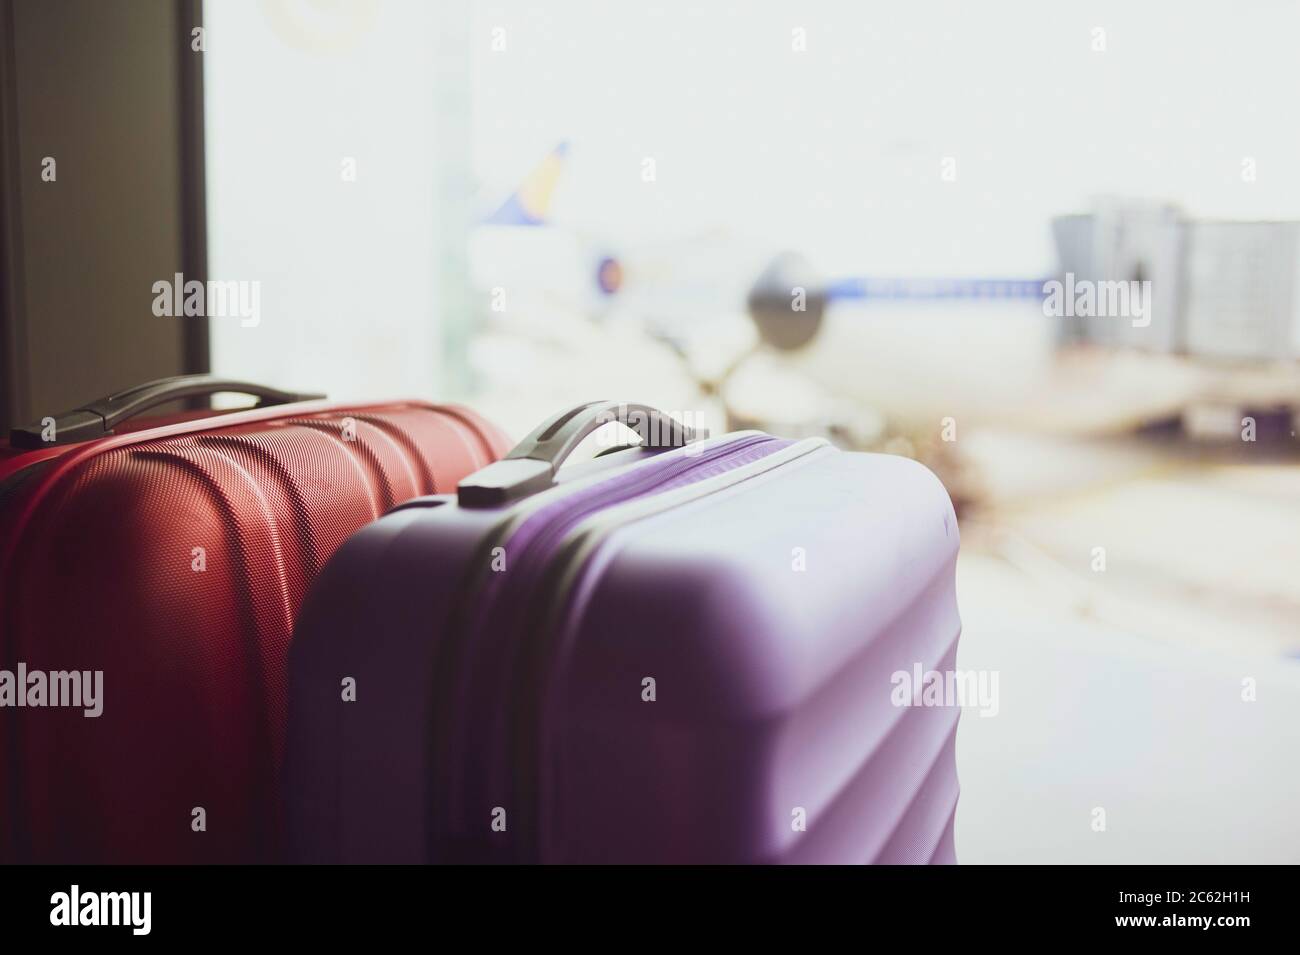 Couple of suitcases in airport, against the view on plane parked Stock Photo